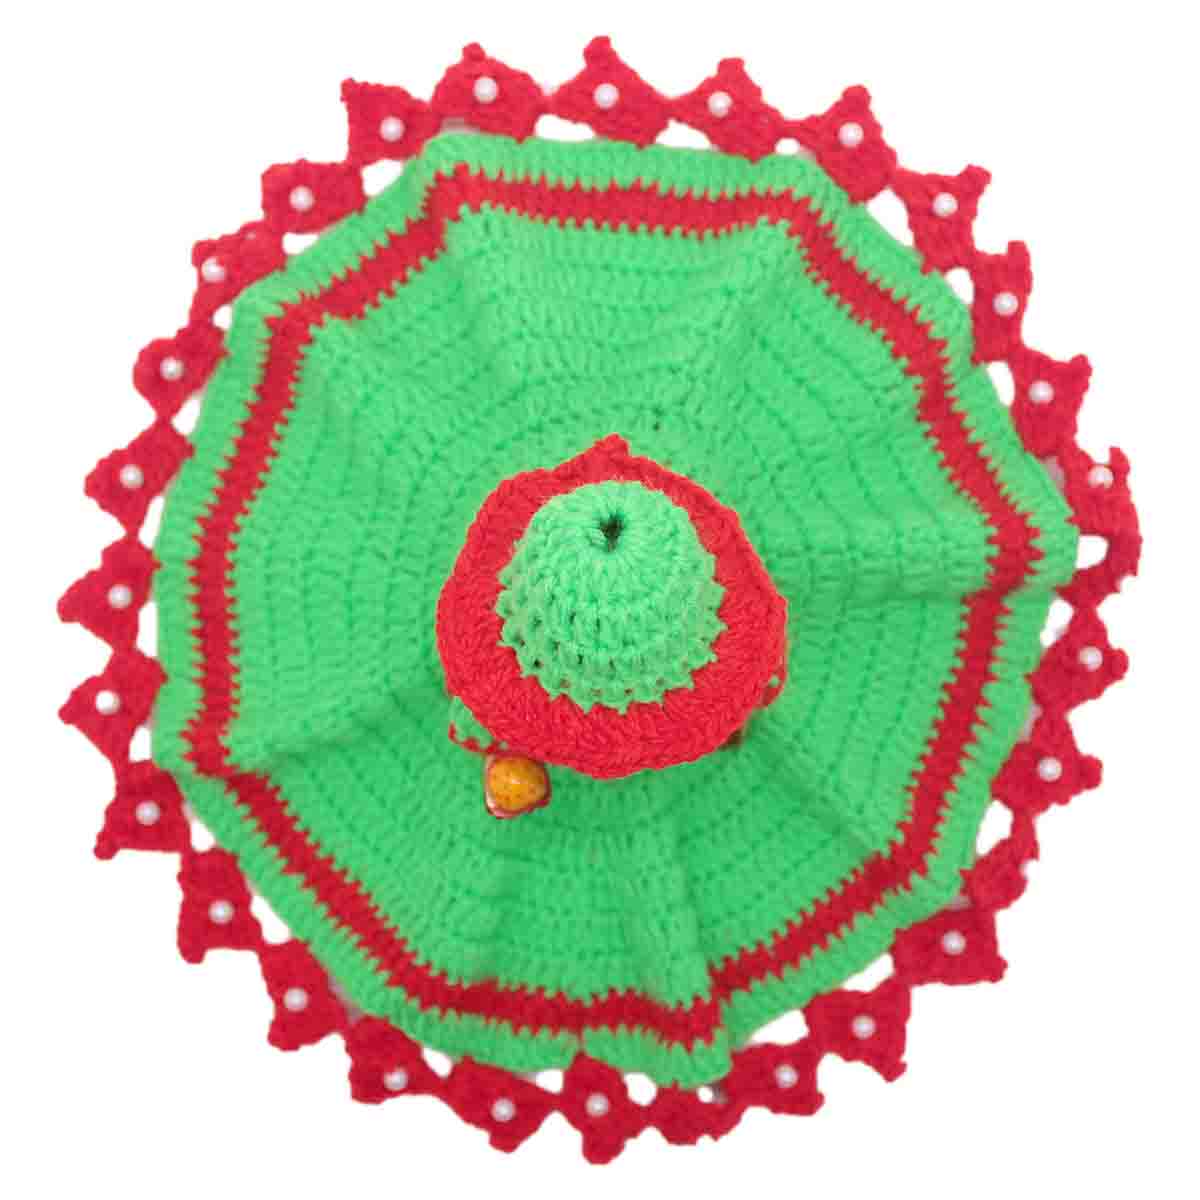 Red and Green Color Decorated Woollen Dress For Laddu Gopal ji